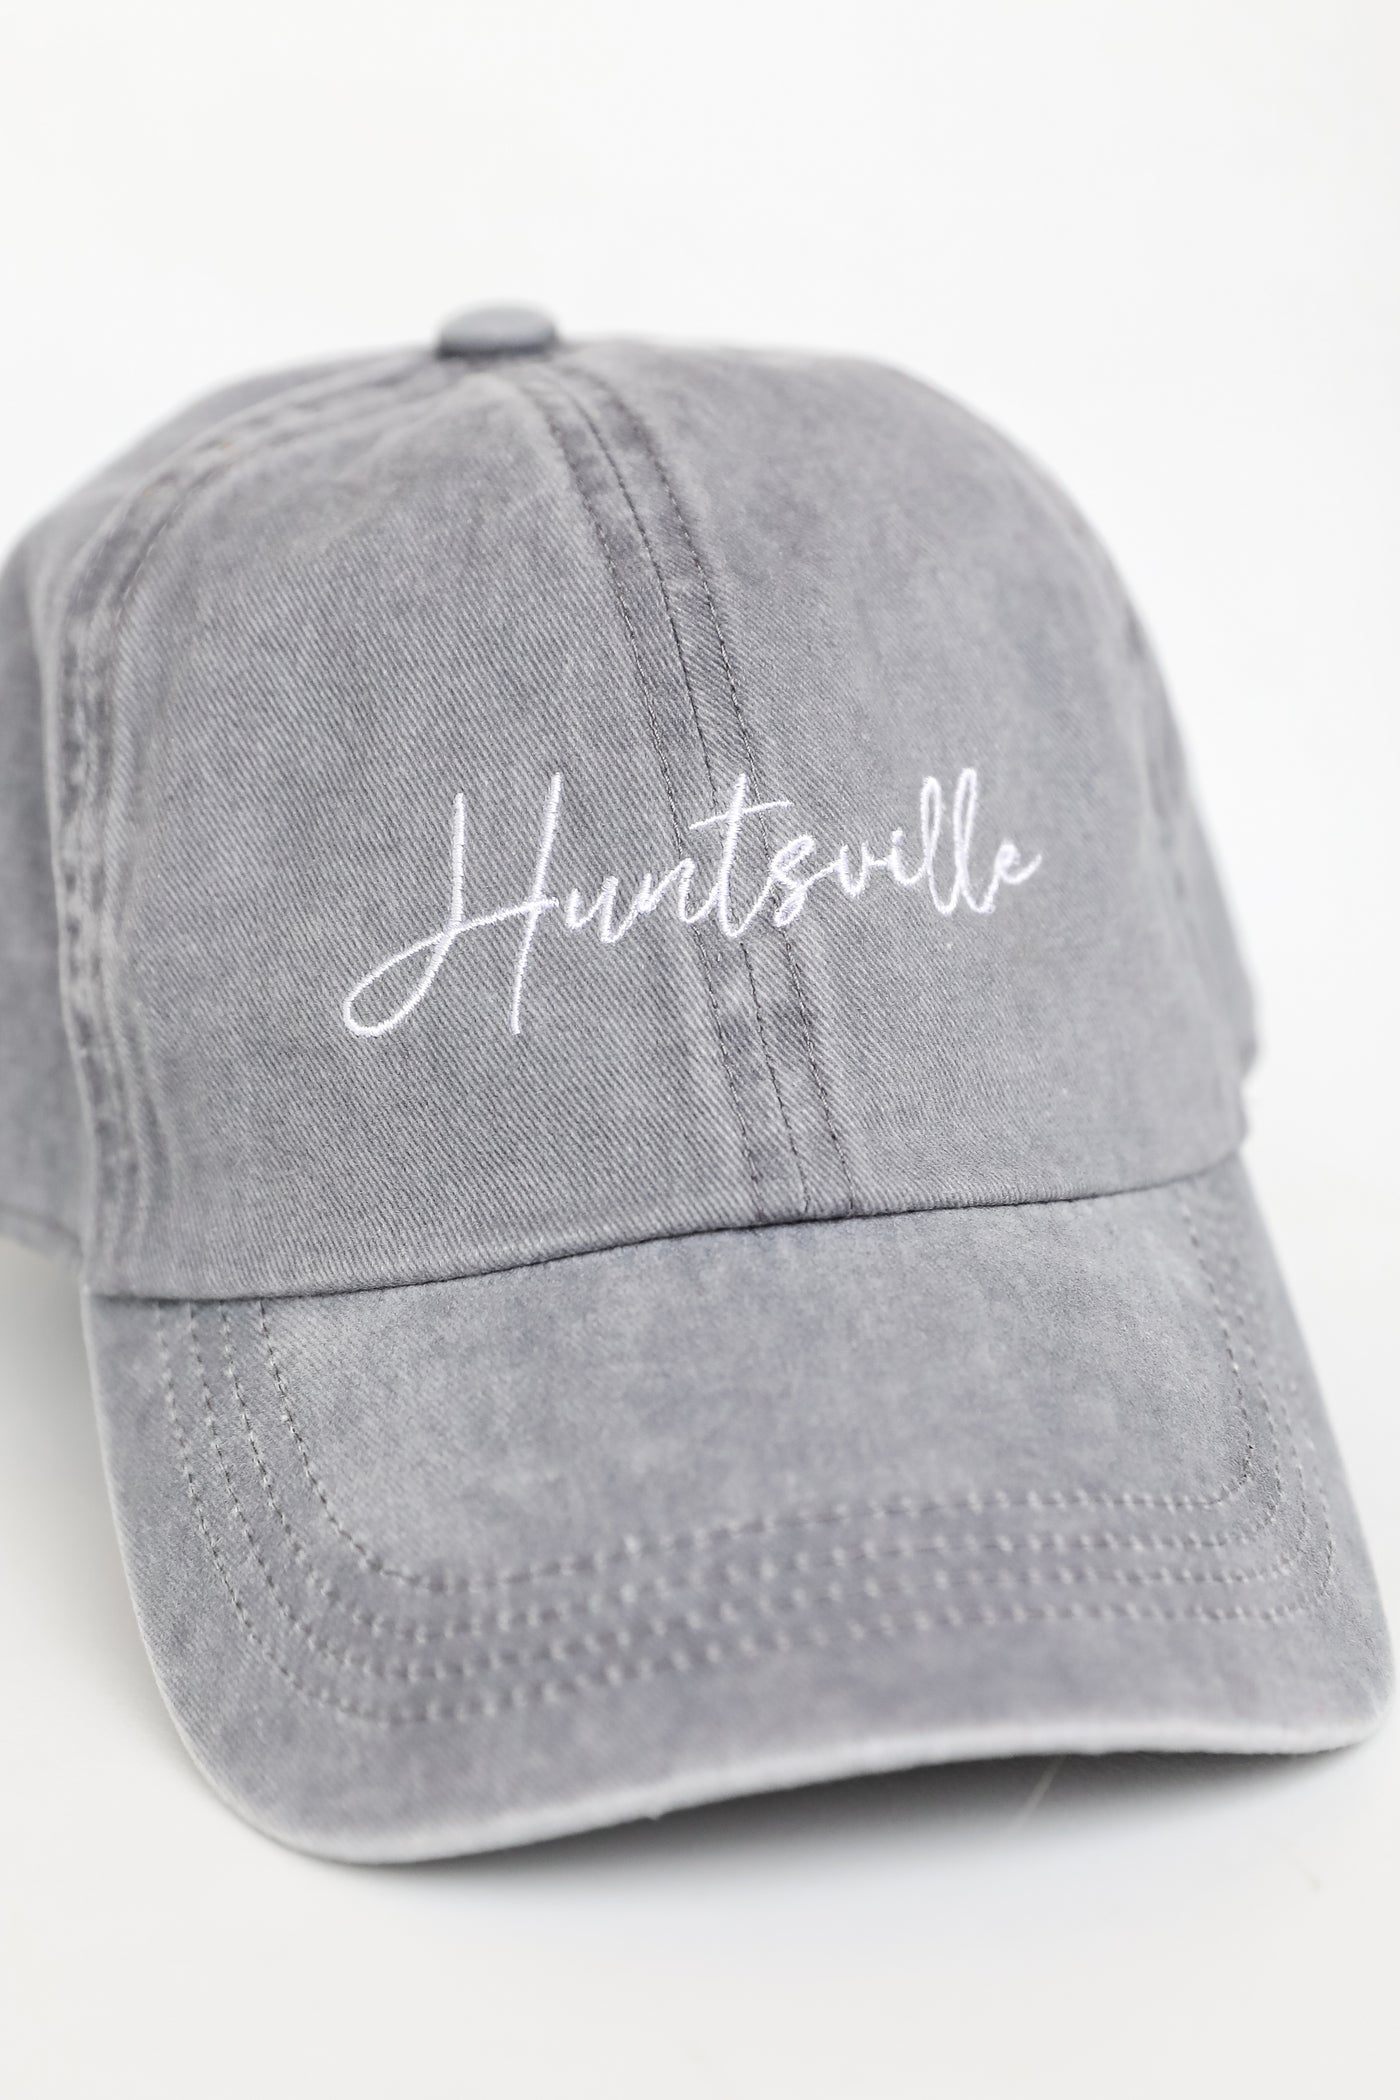 Huntsville Embroidered Hat flat lay